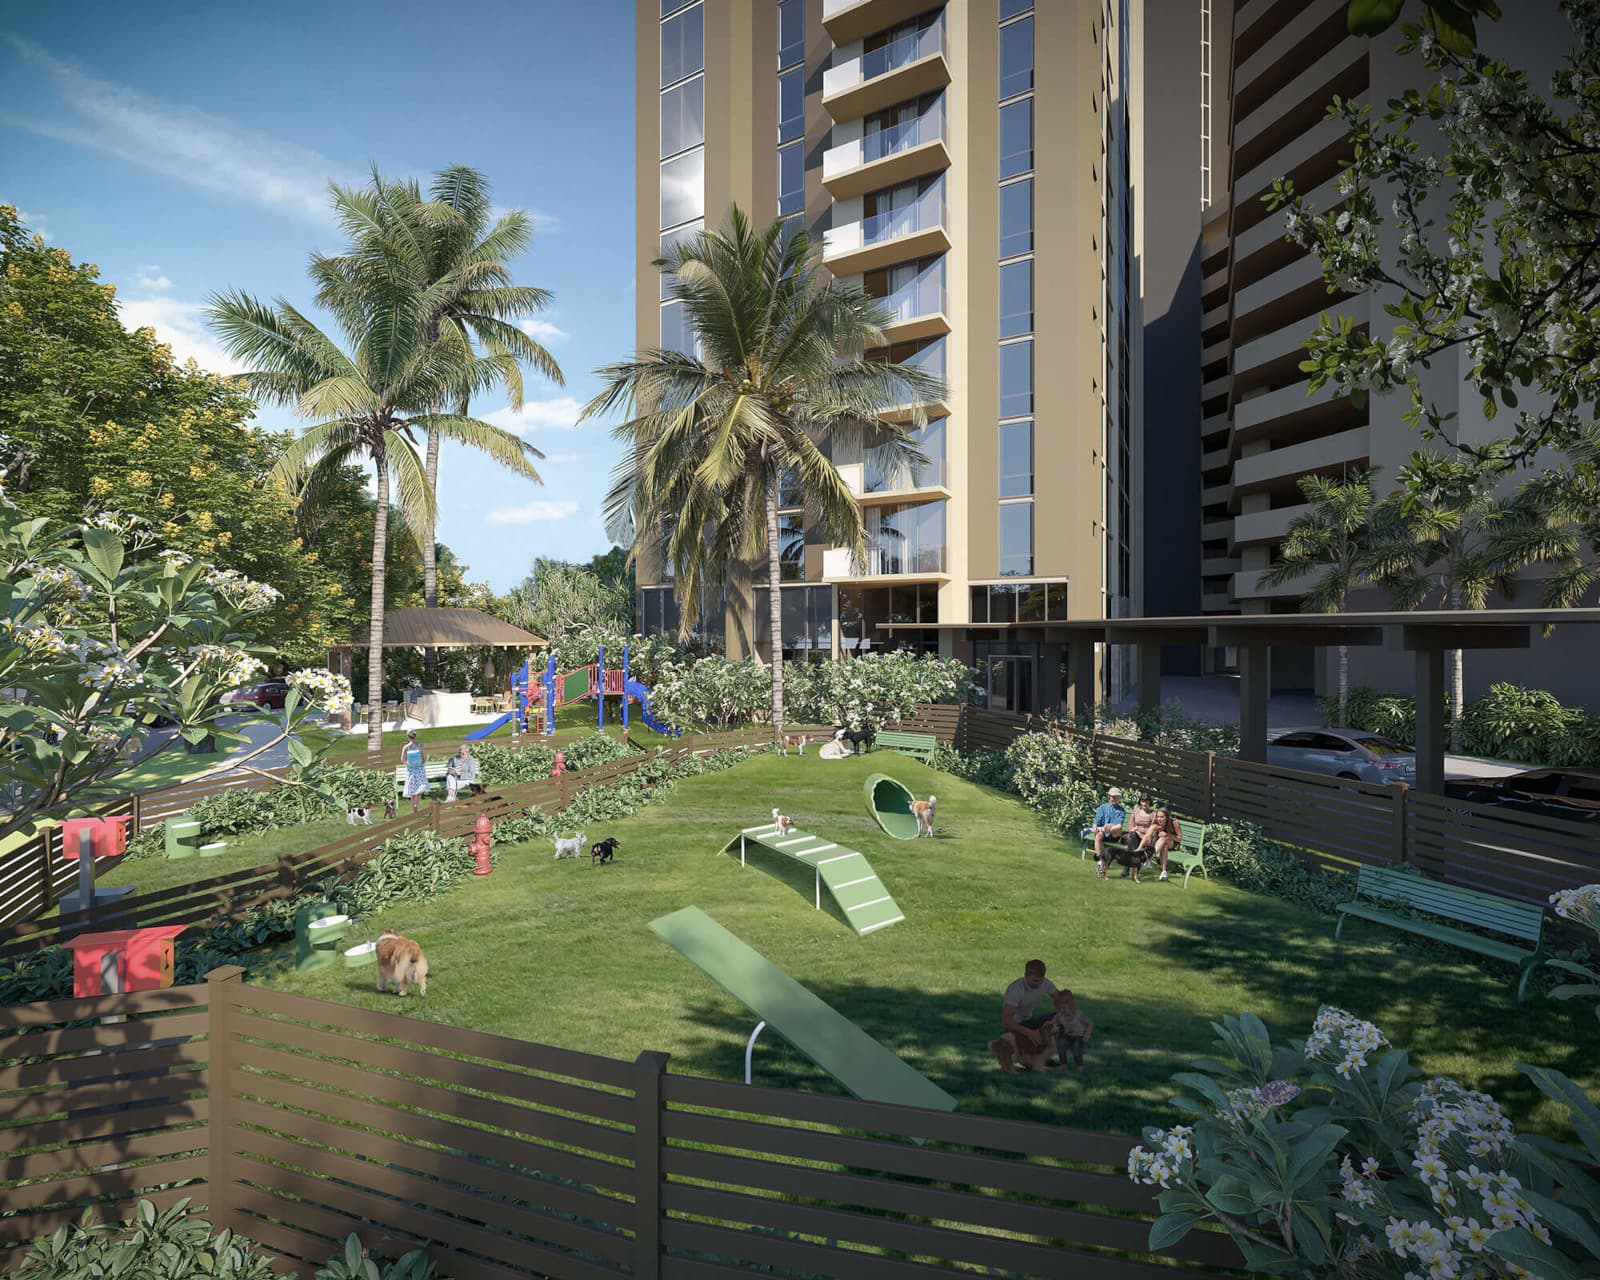 Dog Park Rendering For Kuilei Place in Honolulu